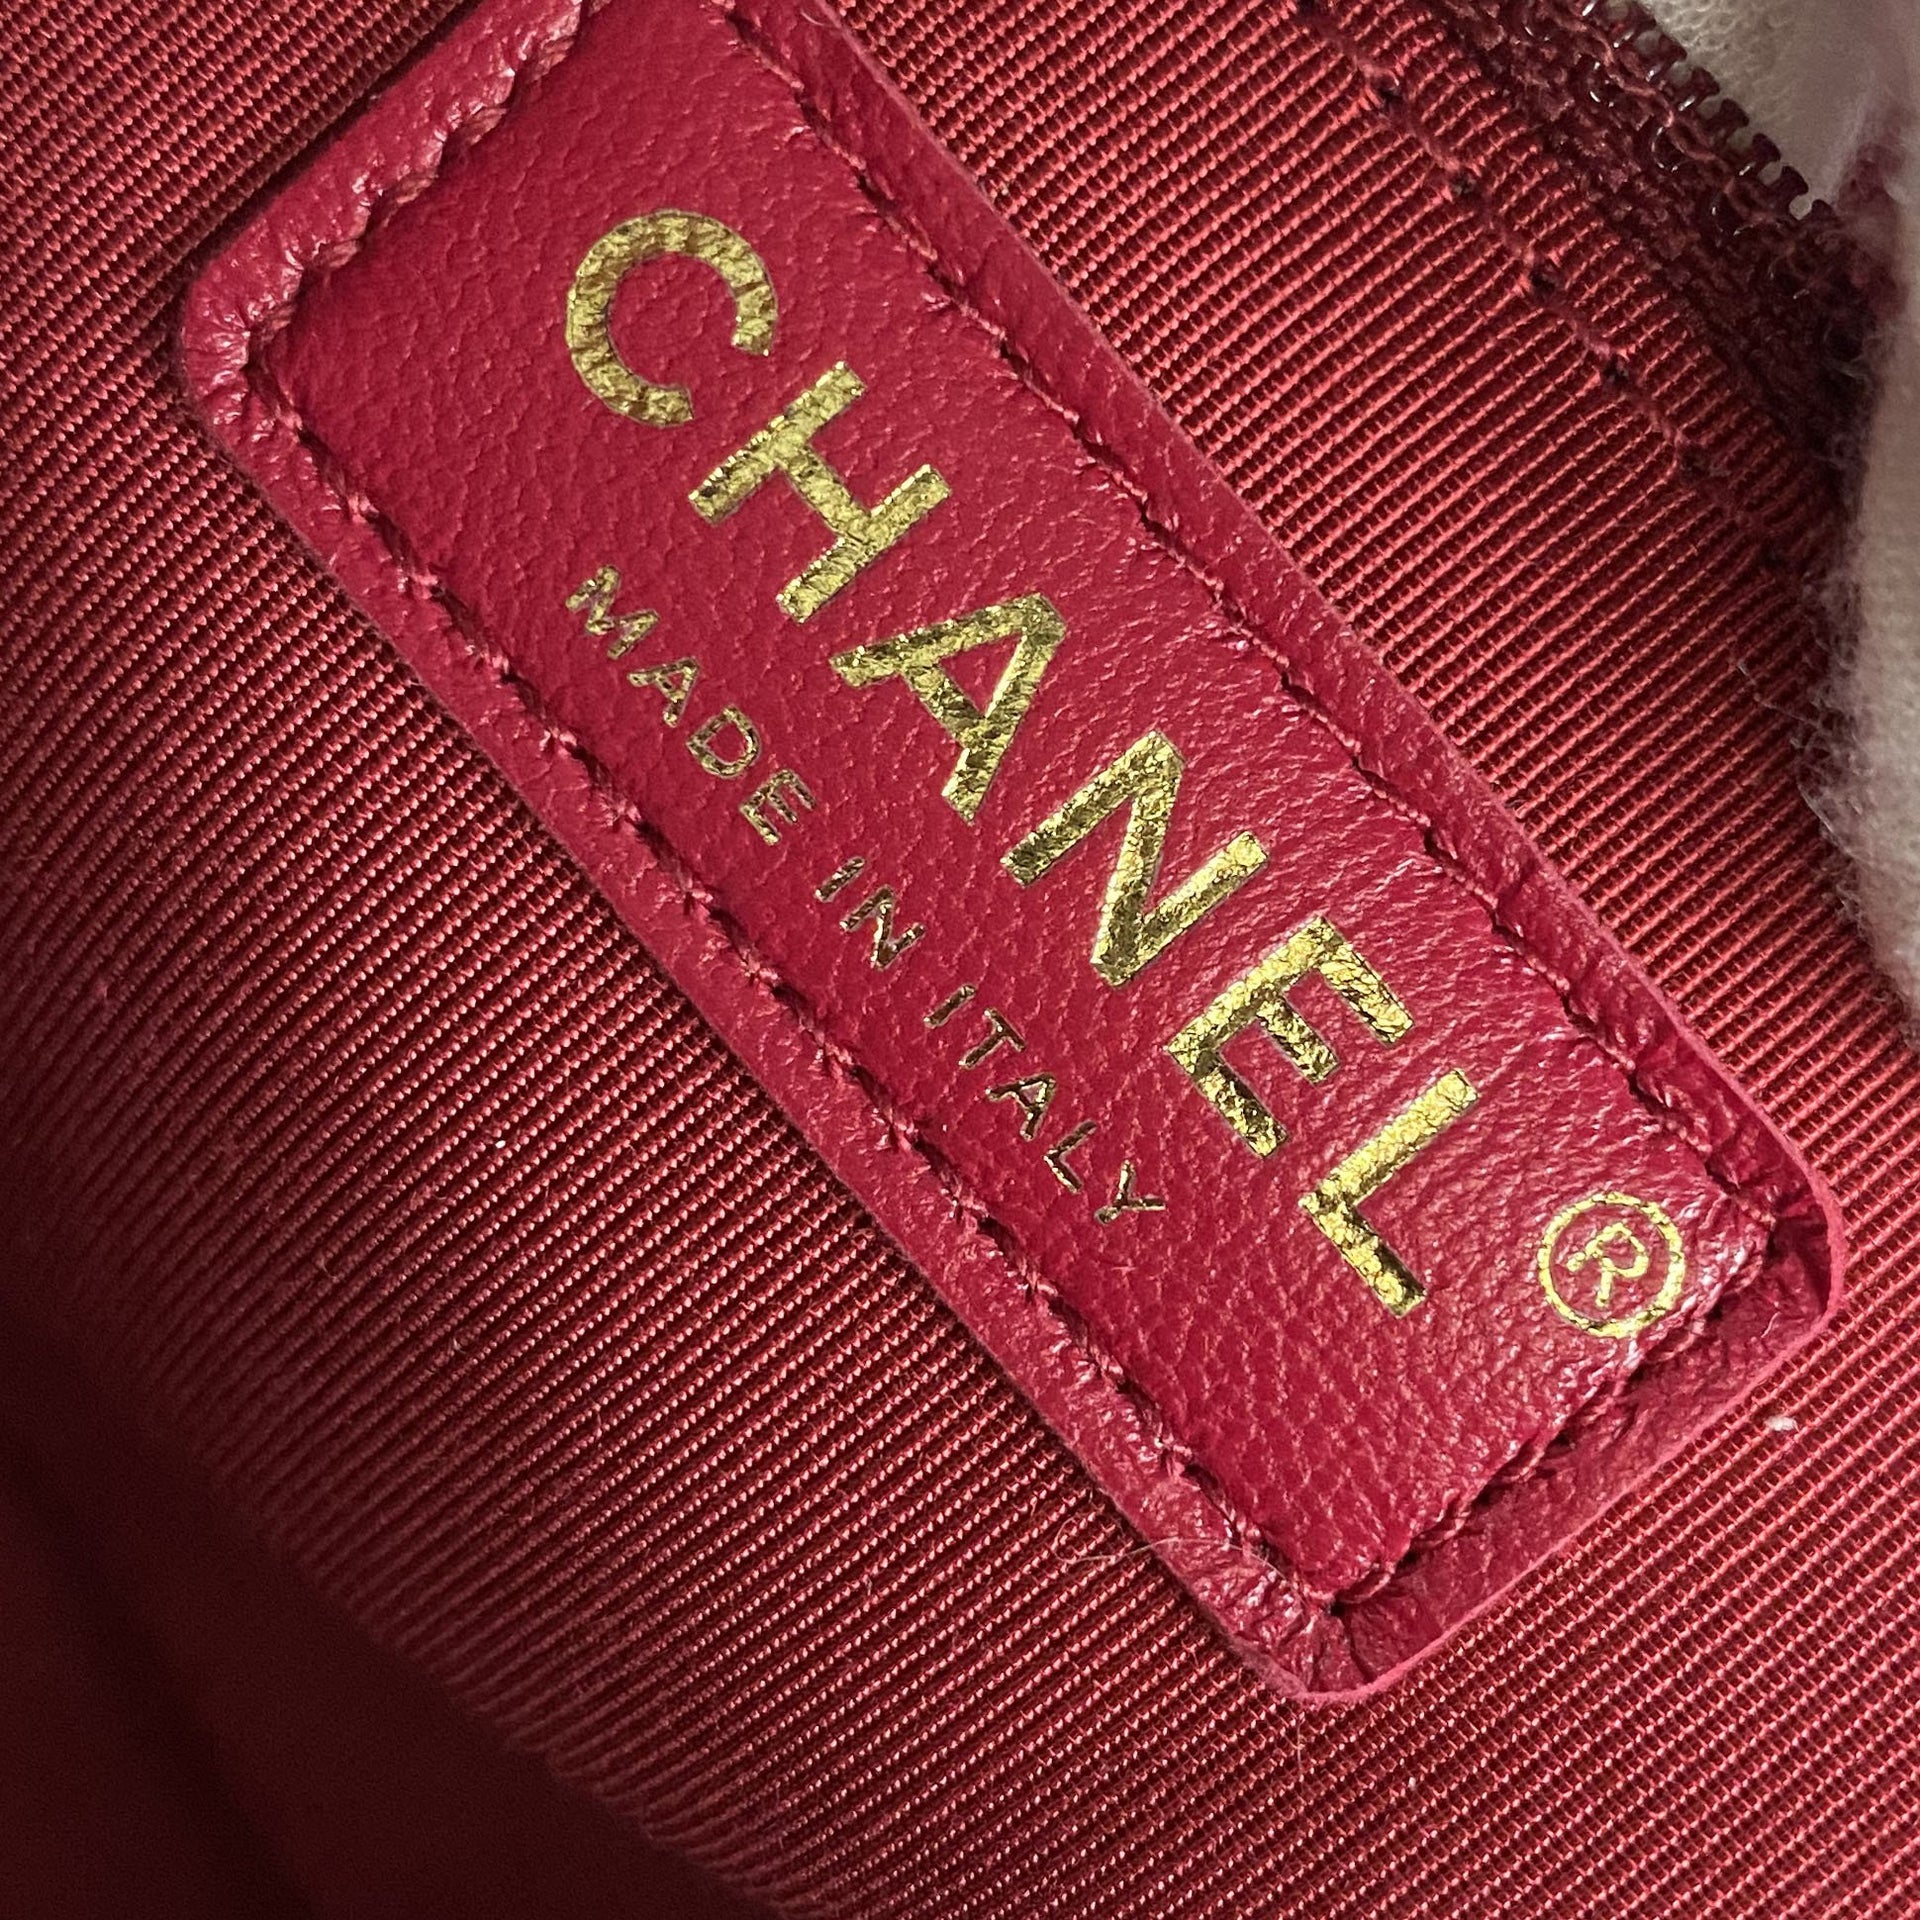 How to Buy a Guaranteed Authentic Pre-Owned Chanel Bag – HG Bags Online